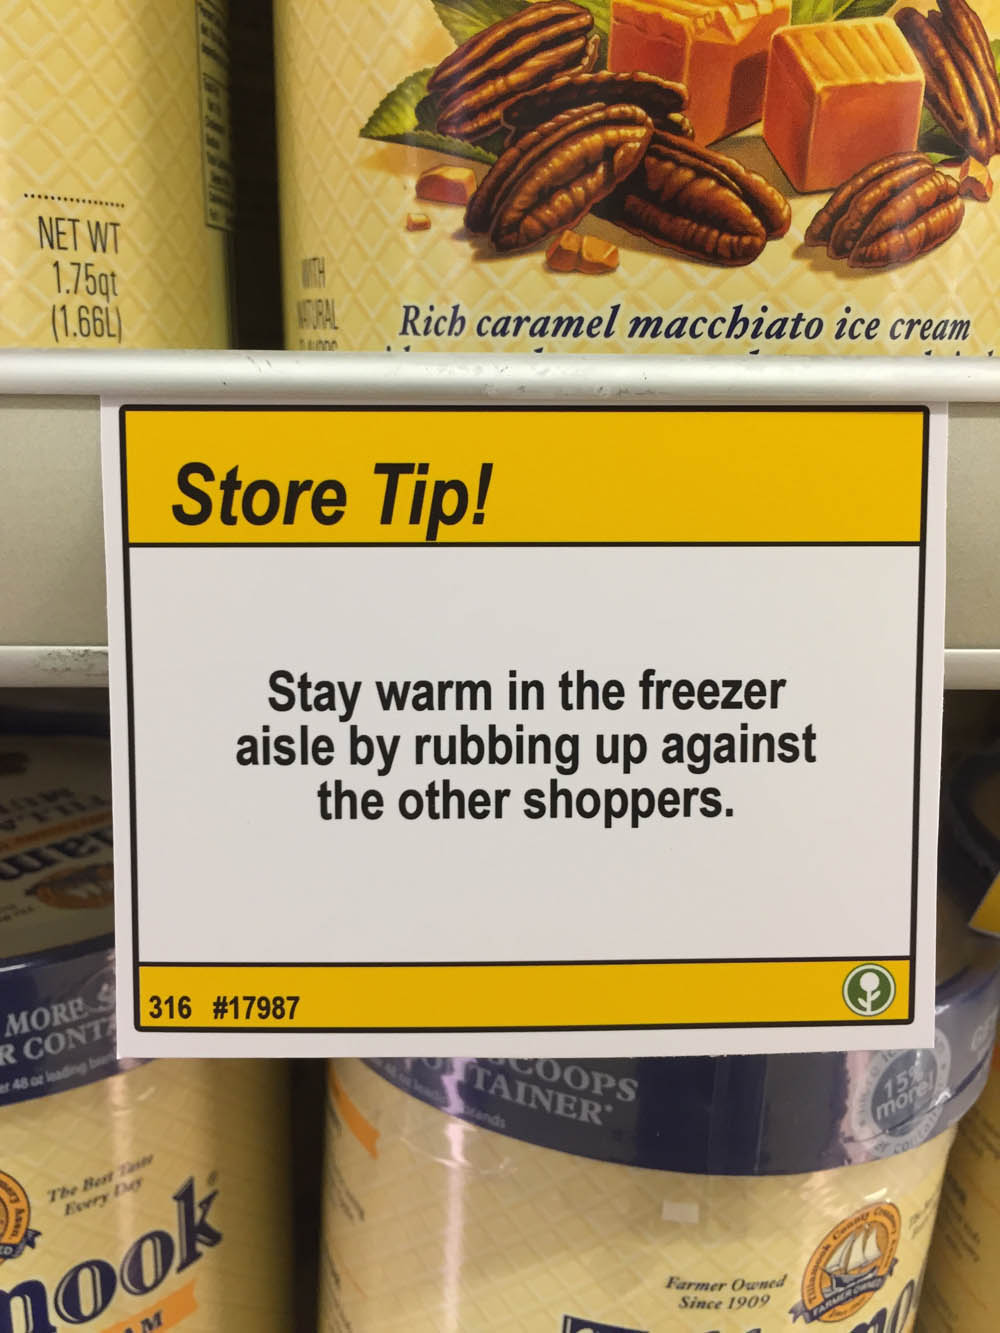 store tips - Net Wt 1.75gt 1.66L Rich caramel macchiato ice cream Store Tip! Stay warm in the freezer aisle by rubbing up against the other shoppers. 316 More I R Cont Coops Tainer Farmer Owned Since 1909 1ook